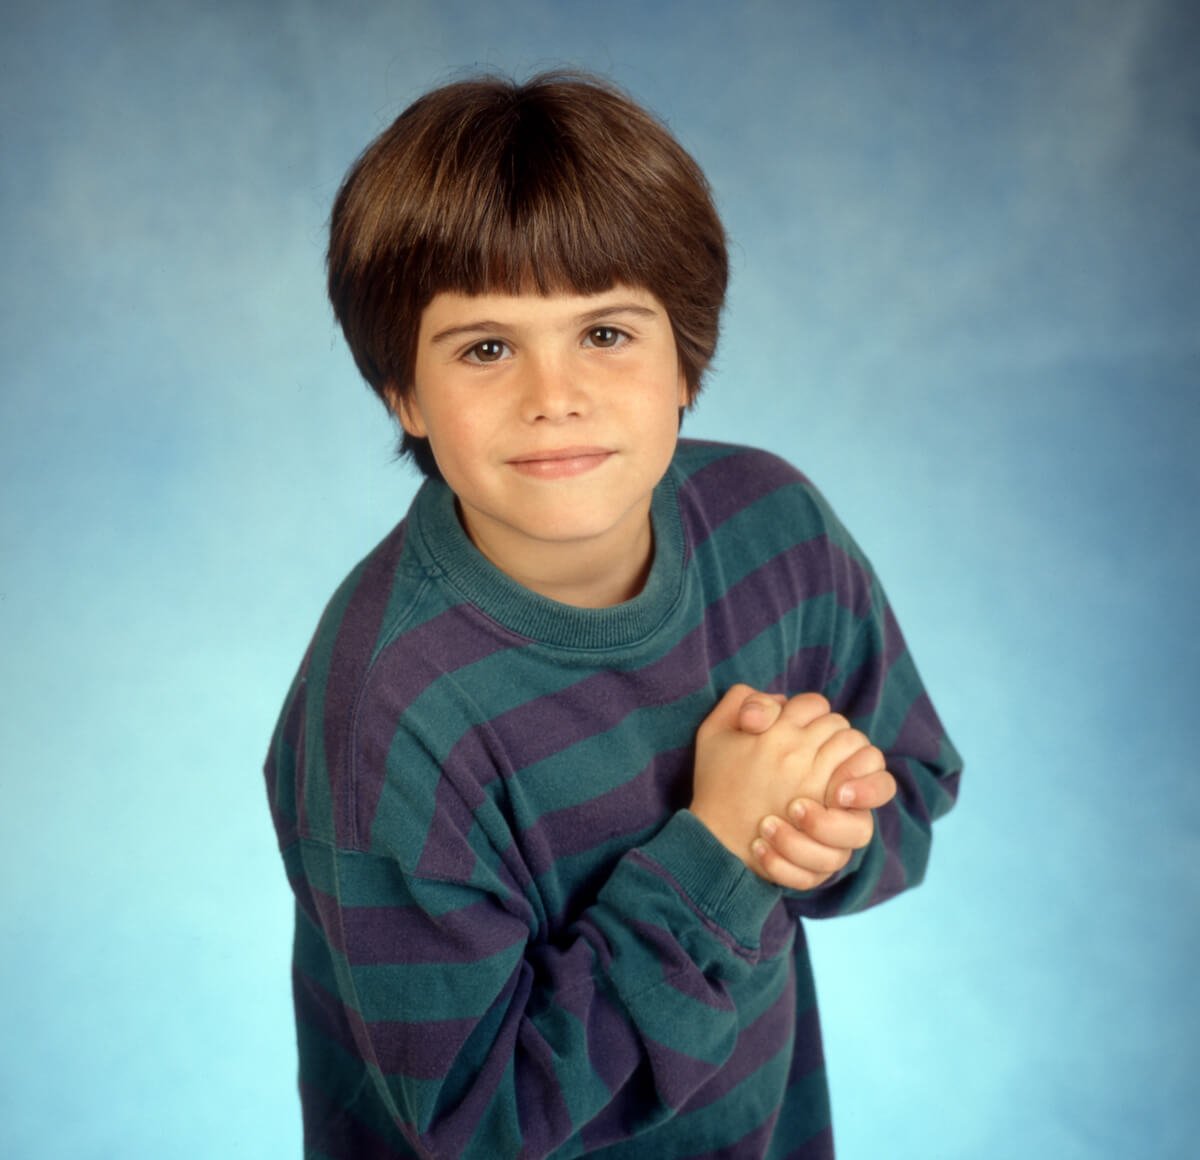 Ross Malinger as a child standing with his hands clasped together